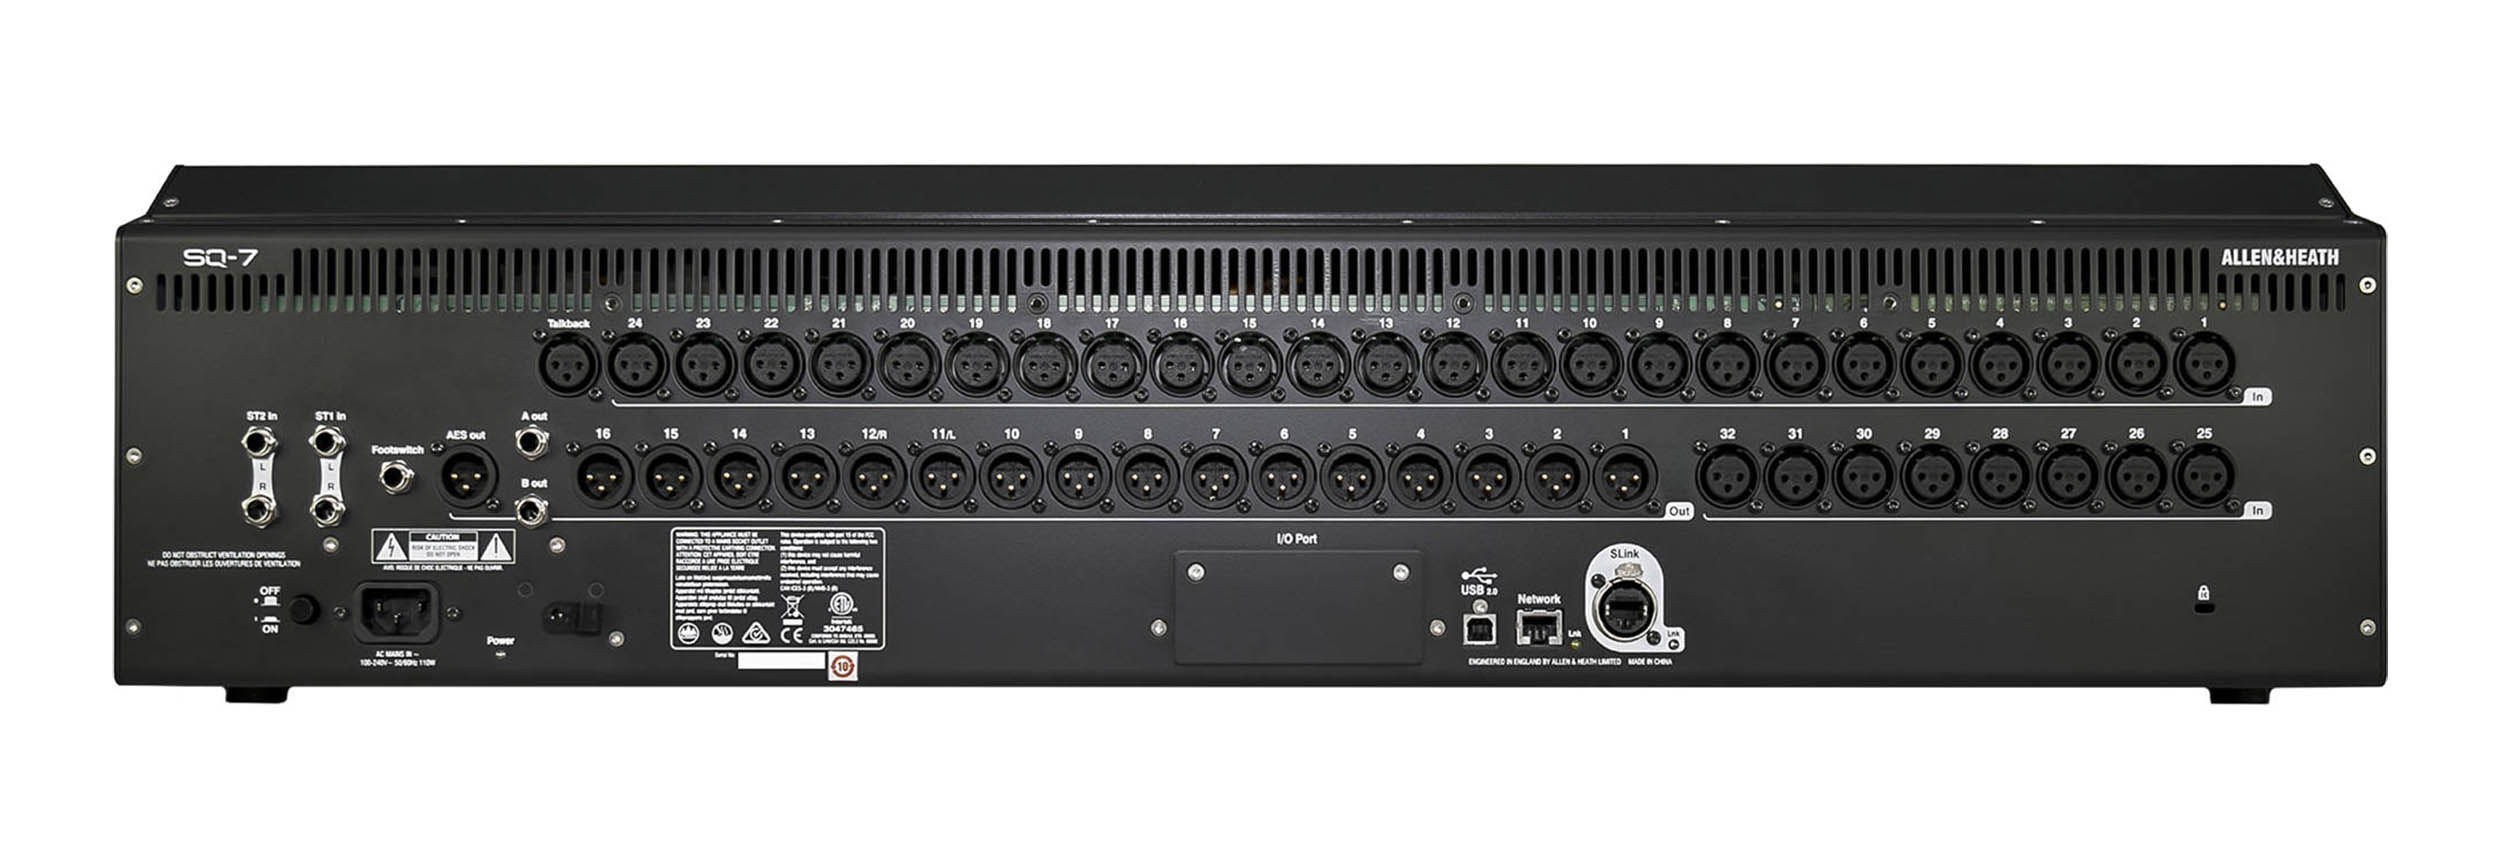 Allen & Heath AH-SQ-7 48-Channel and 36-Bus Digital Mixer with 32+1 Motorized Faders - Hollywood DJ